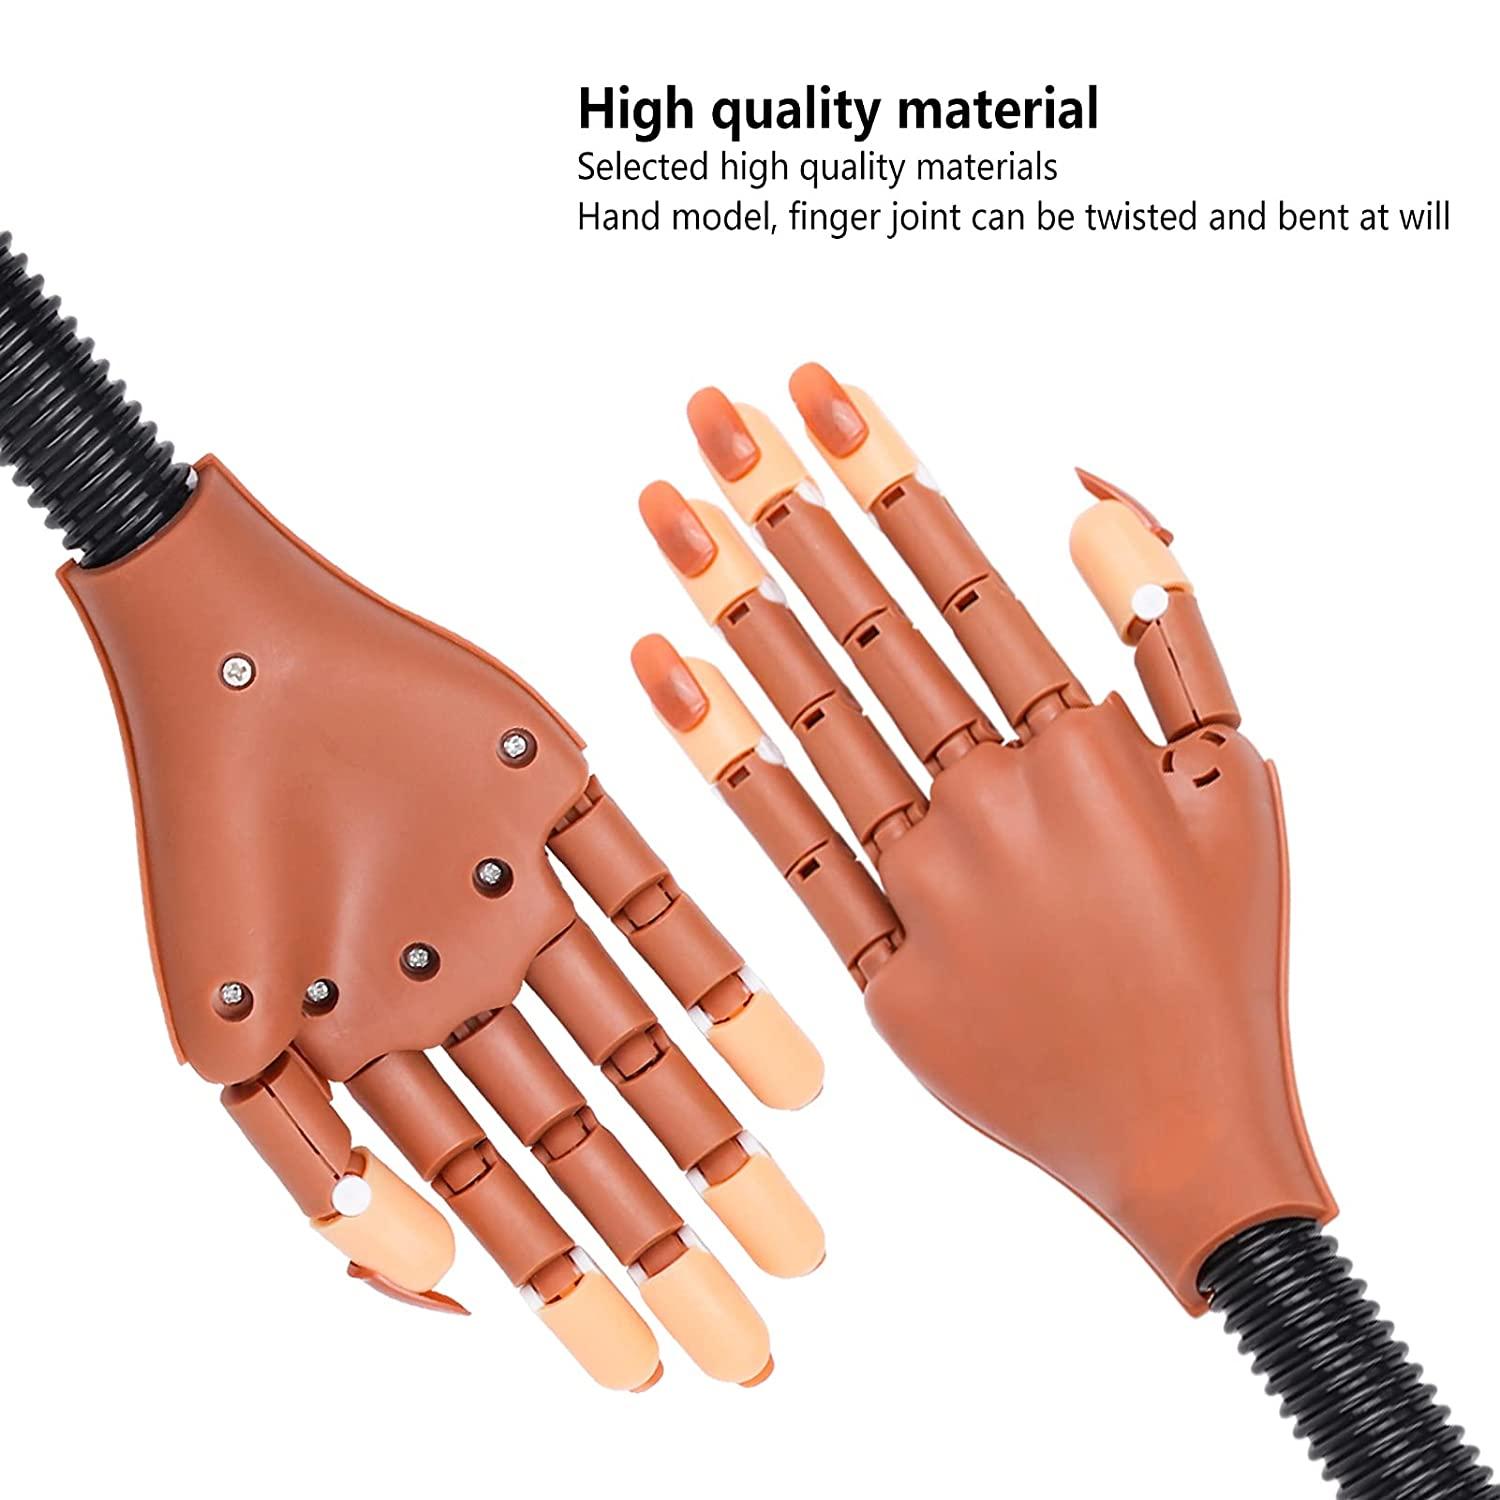 Nail Practice Hand For Acrylic Nails Flexible Movable False Fake Hand, Nail  Display Manicure Supply, Acrylic Nail Technician Manicure Sup From 22,79 €